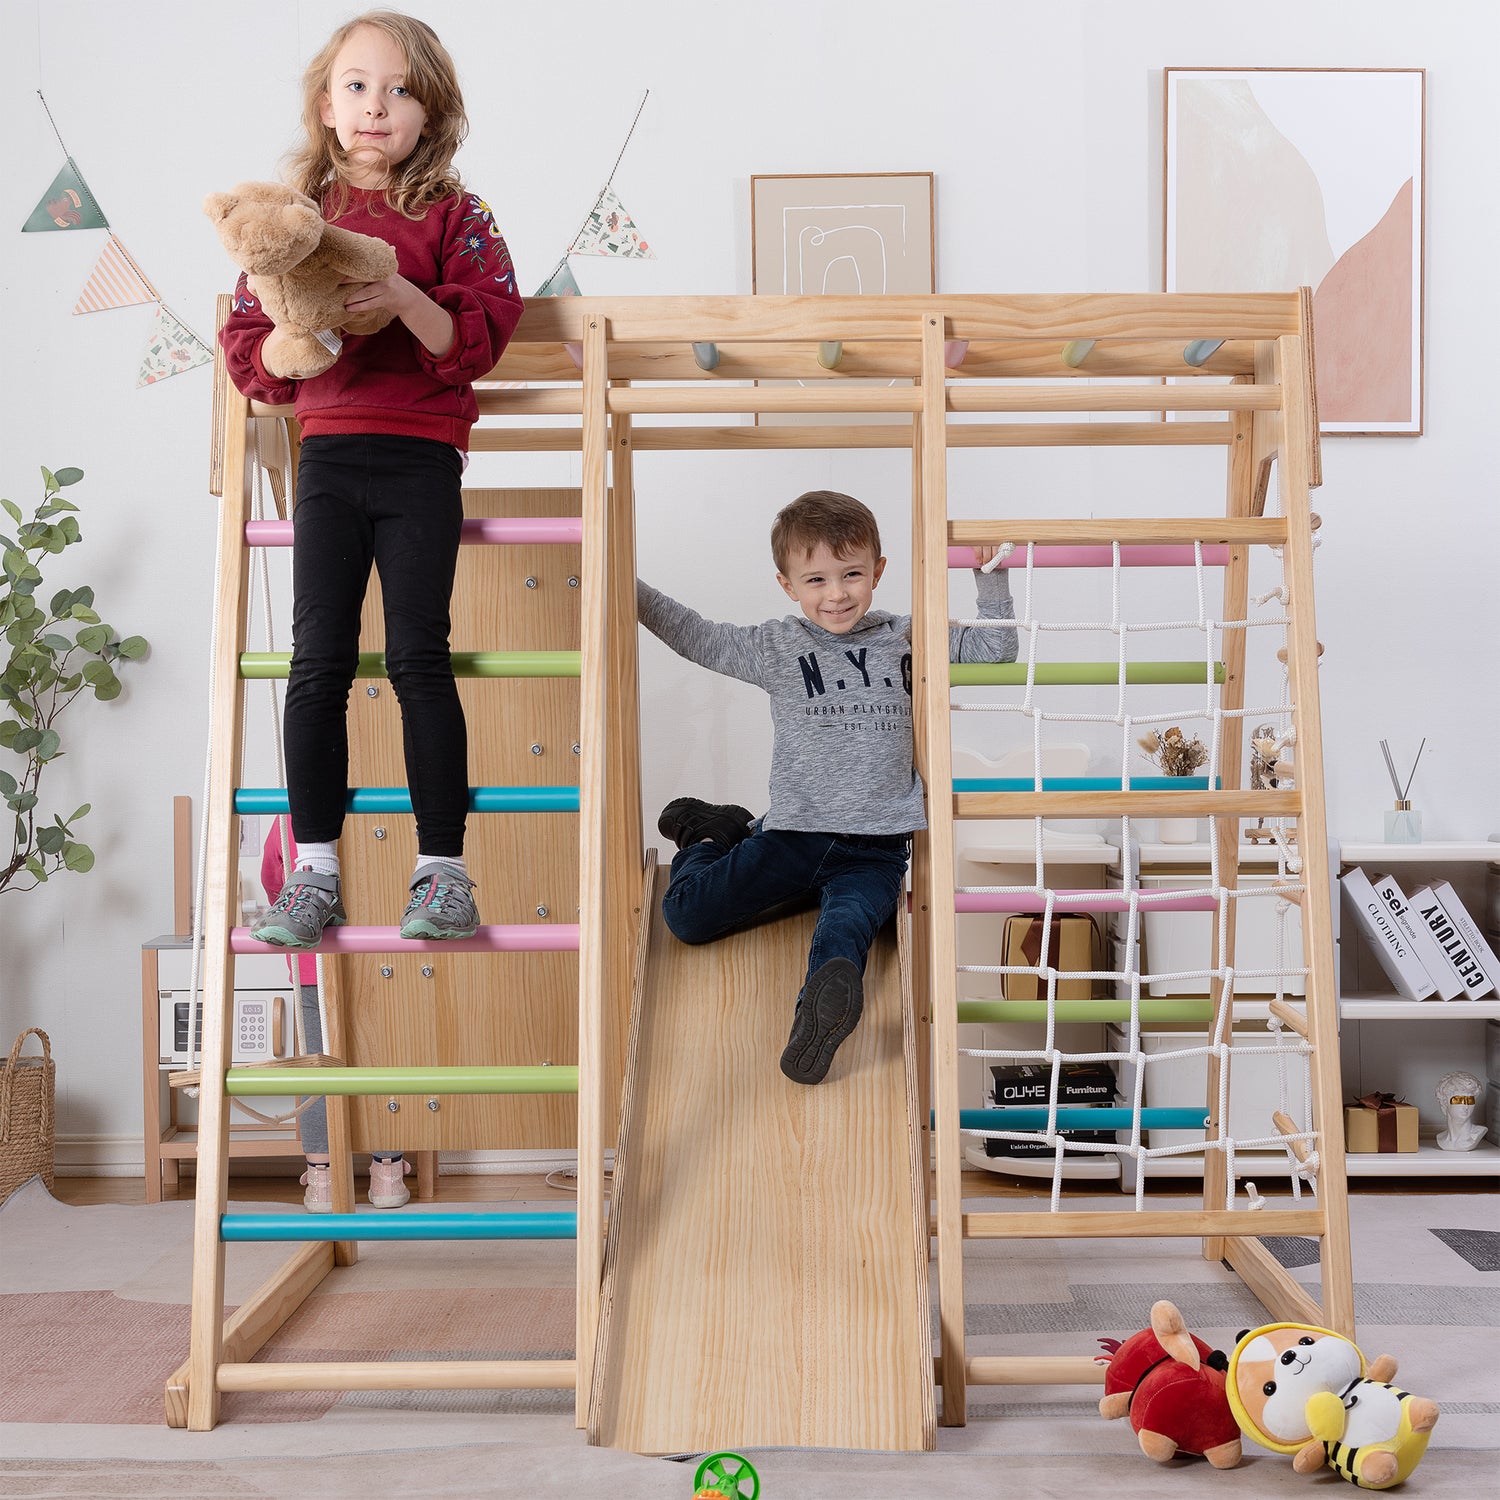 Children Playing on Avenlur's Magnolia Real Wood Playset in Playroom - Front View